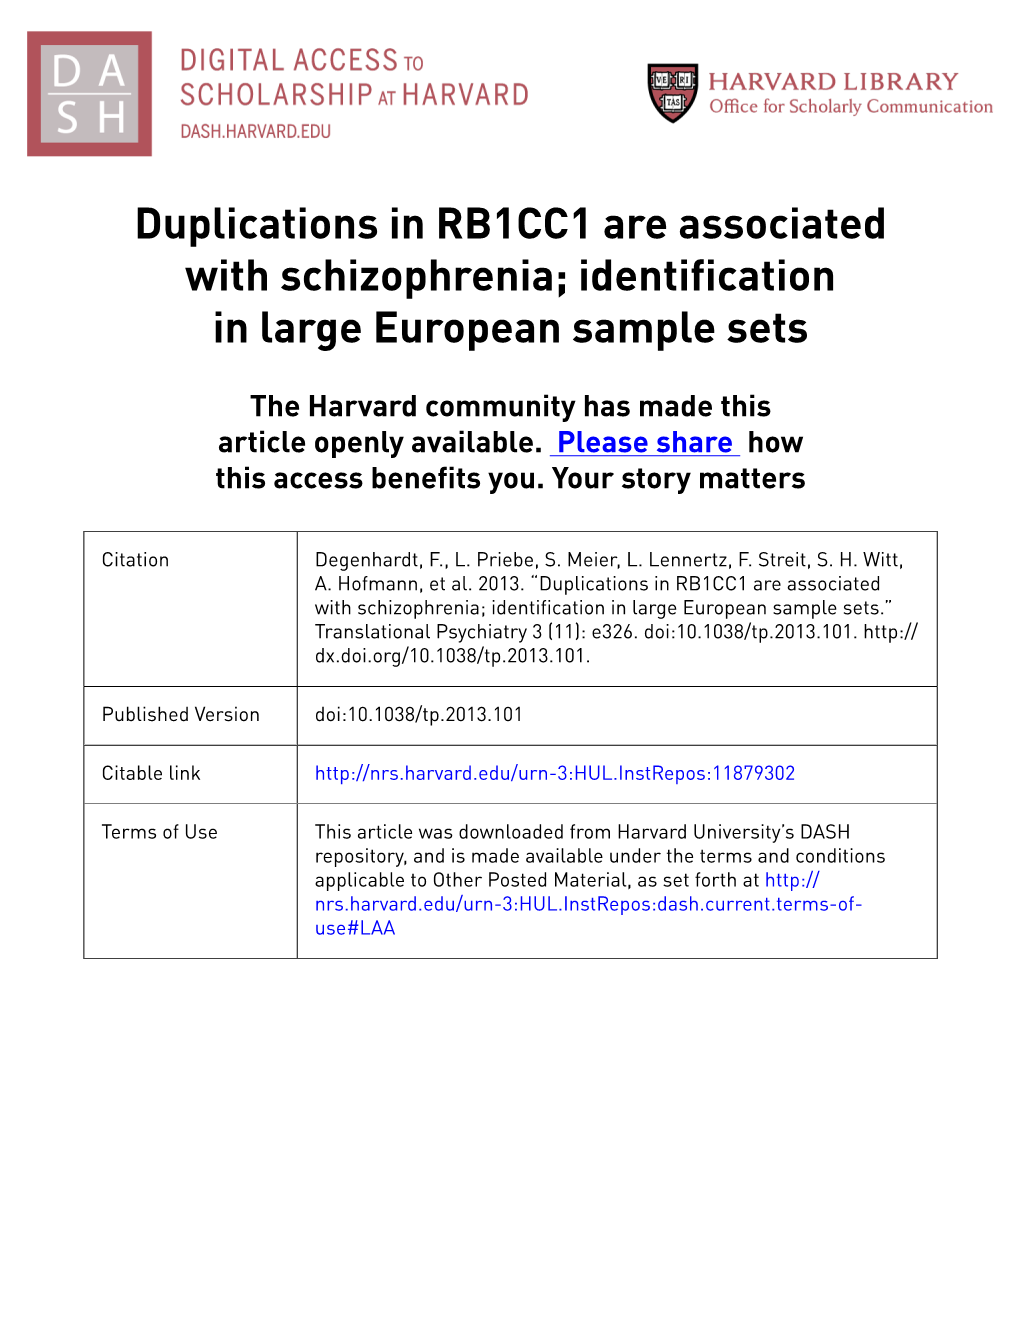 Duplications in RB1CC1 Are Associated with Schizophrenia; Identification in Large European Sample Sets